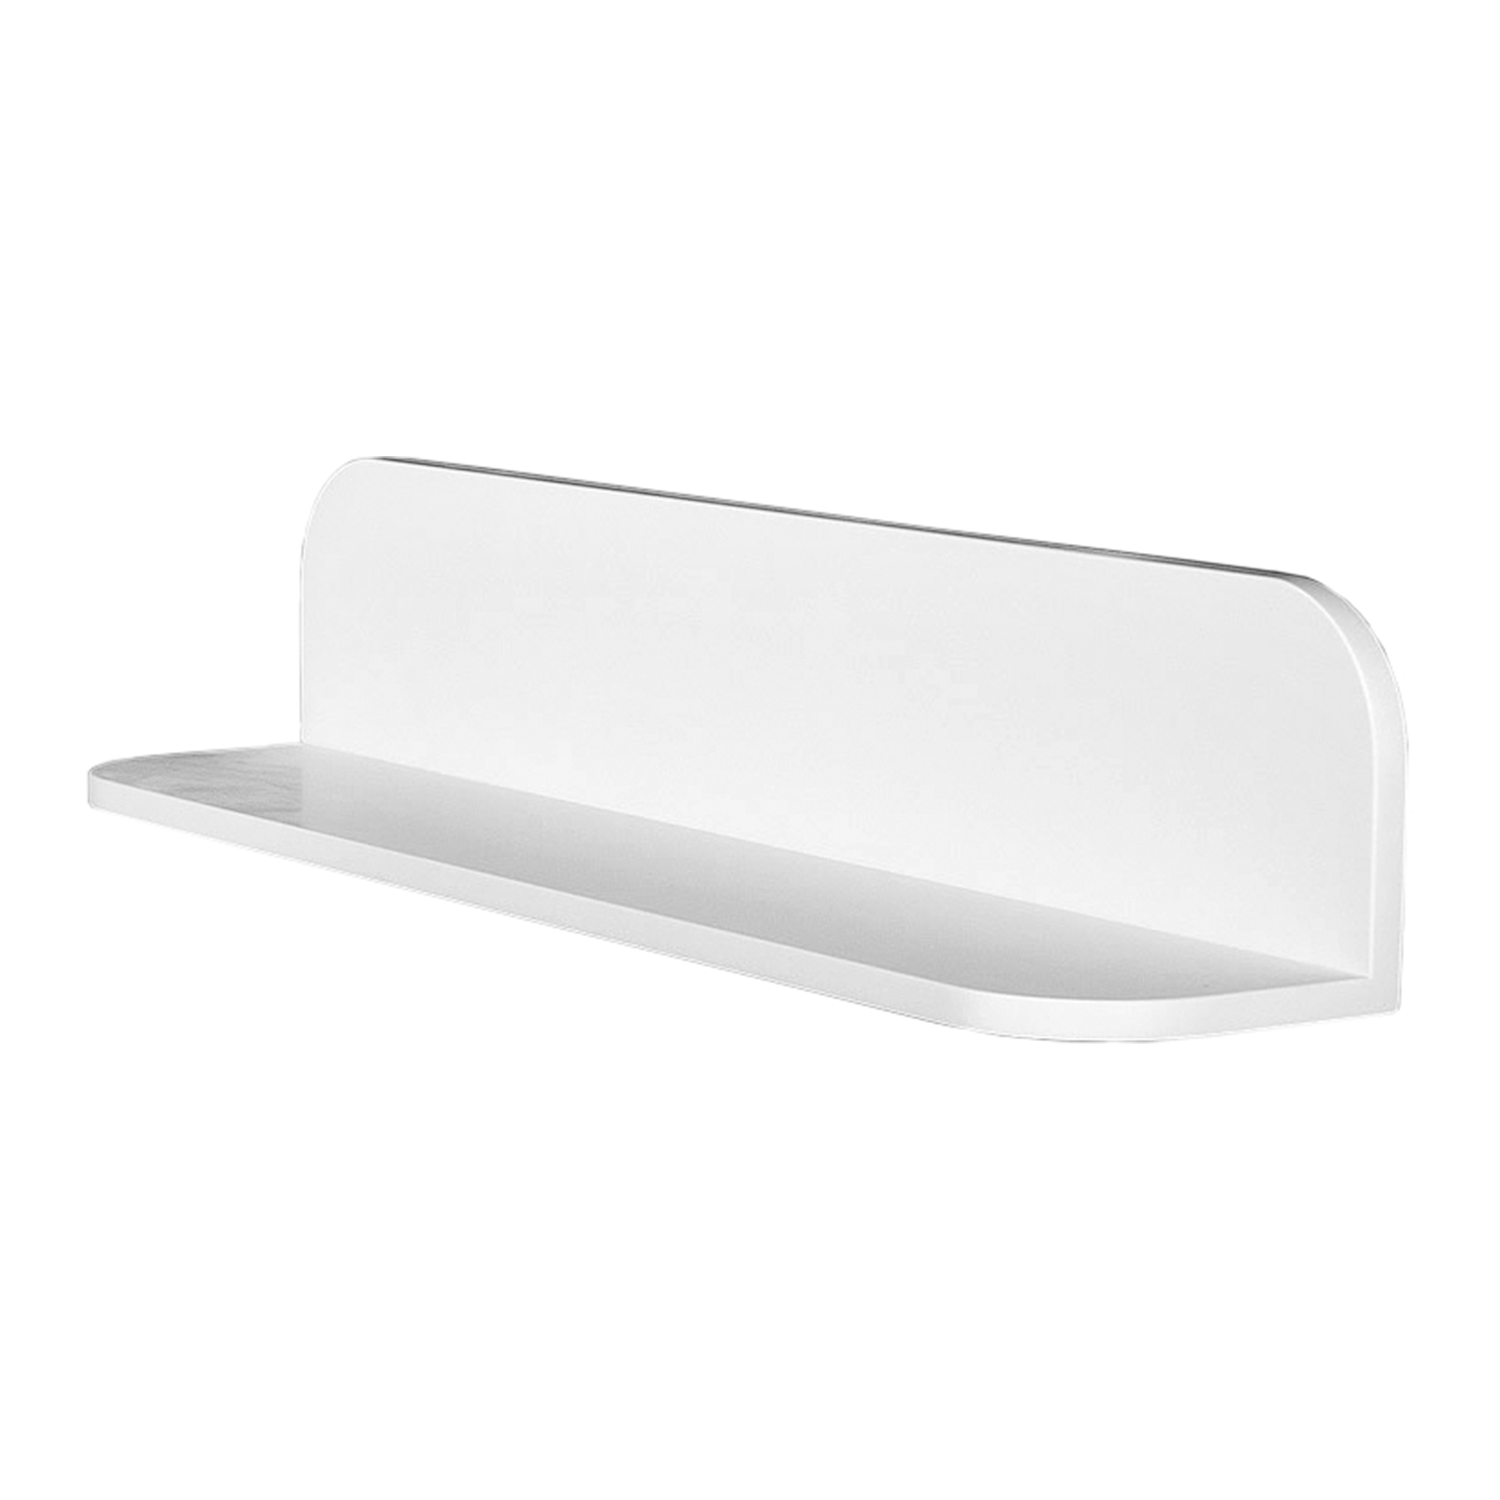 DAX Solid Surface Bathroom Shelf, Wall Mount, White Matte Finish, 23-5/8 x 4-3/4 x 4-3/4 Inches (DAX-AB-1560-24)